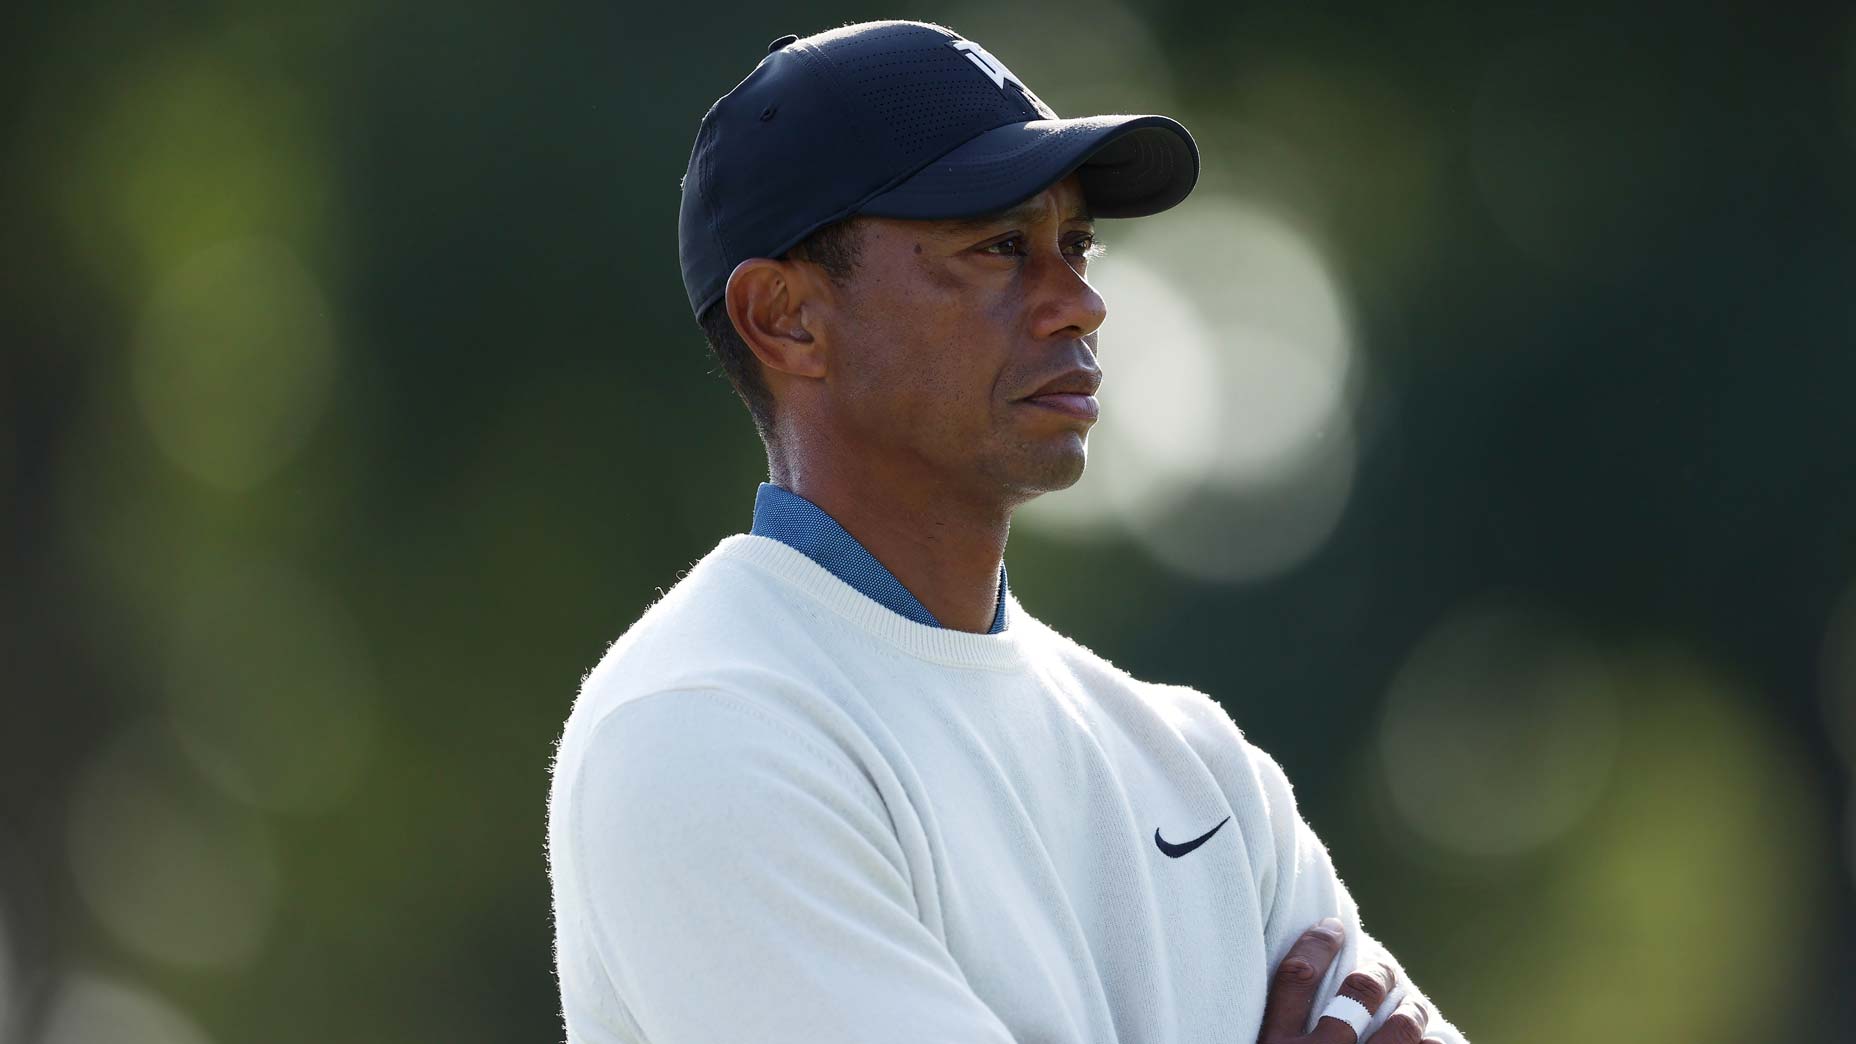 Tiger Woods struggles in Round 2 of U.S. Open, misses cut